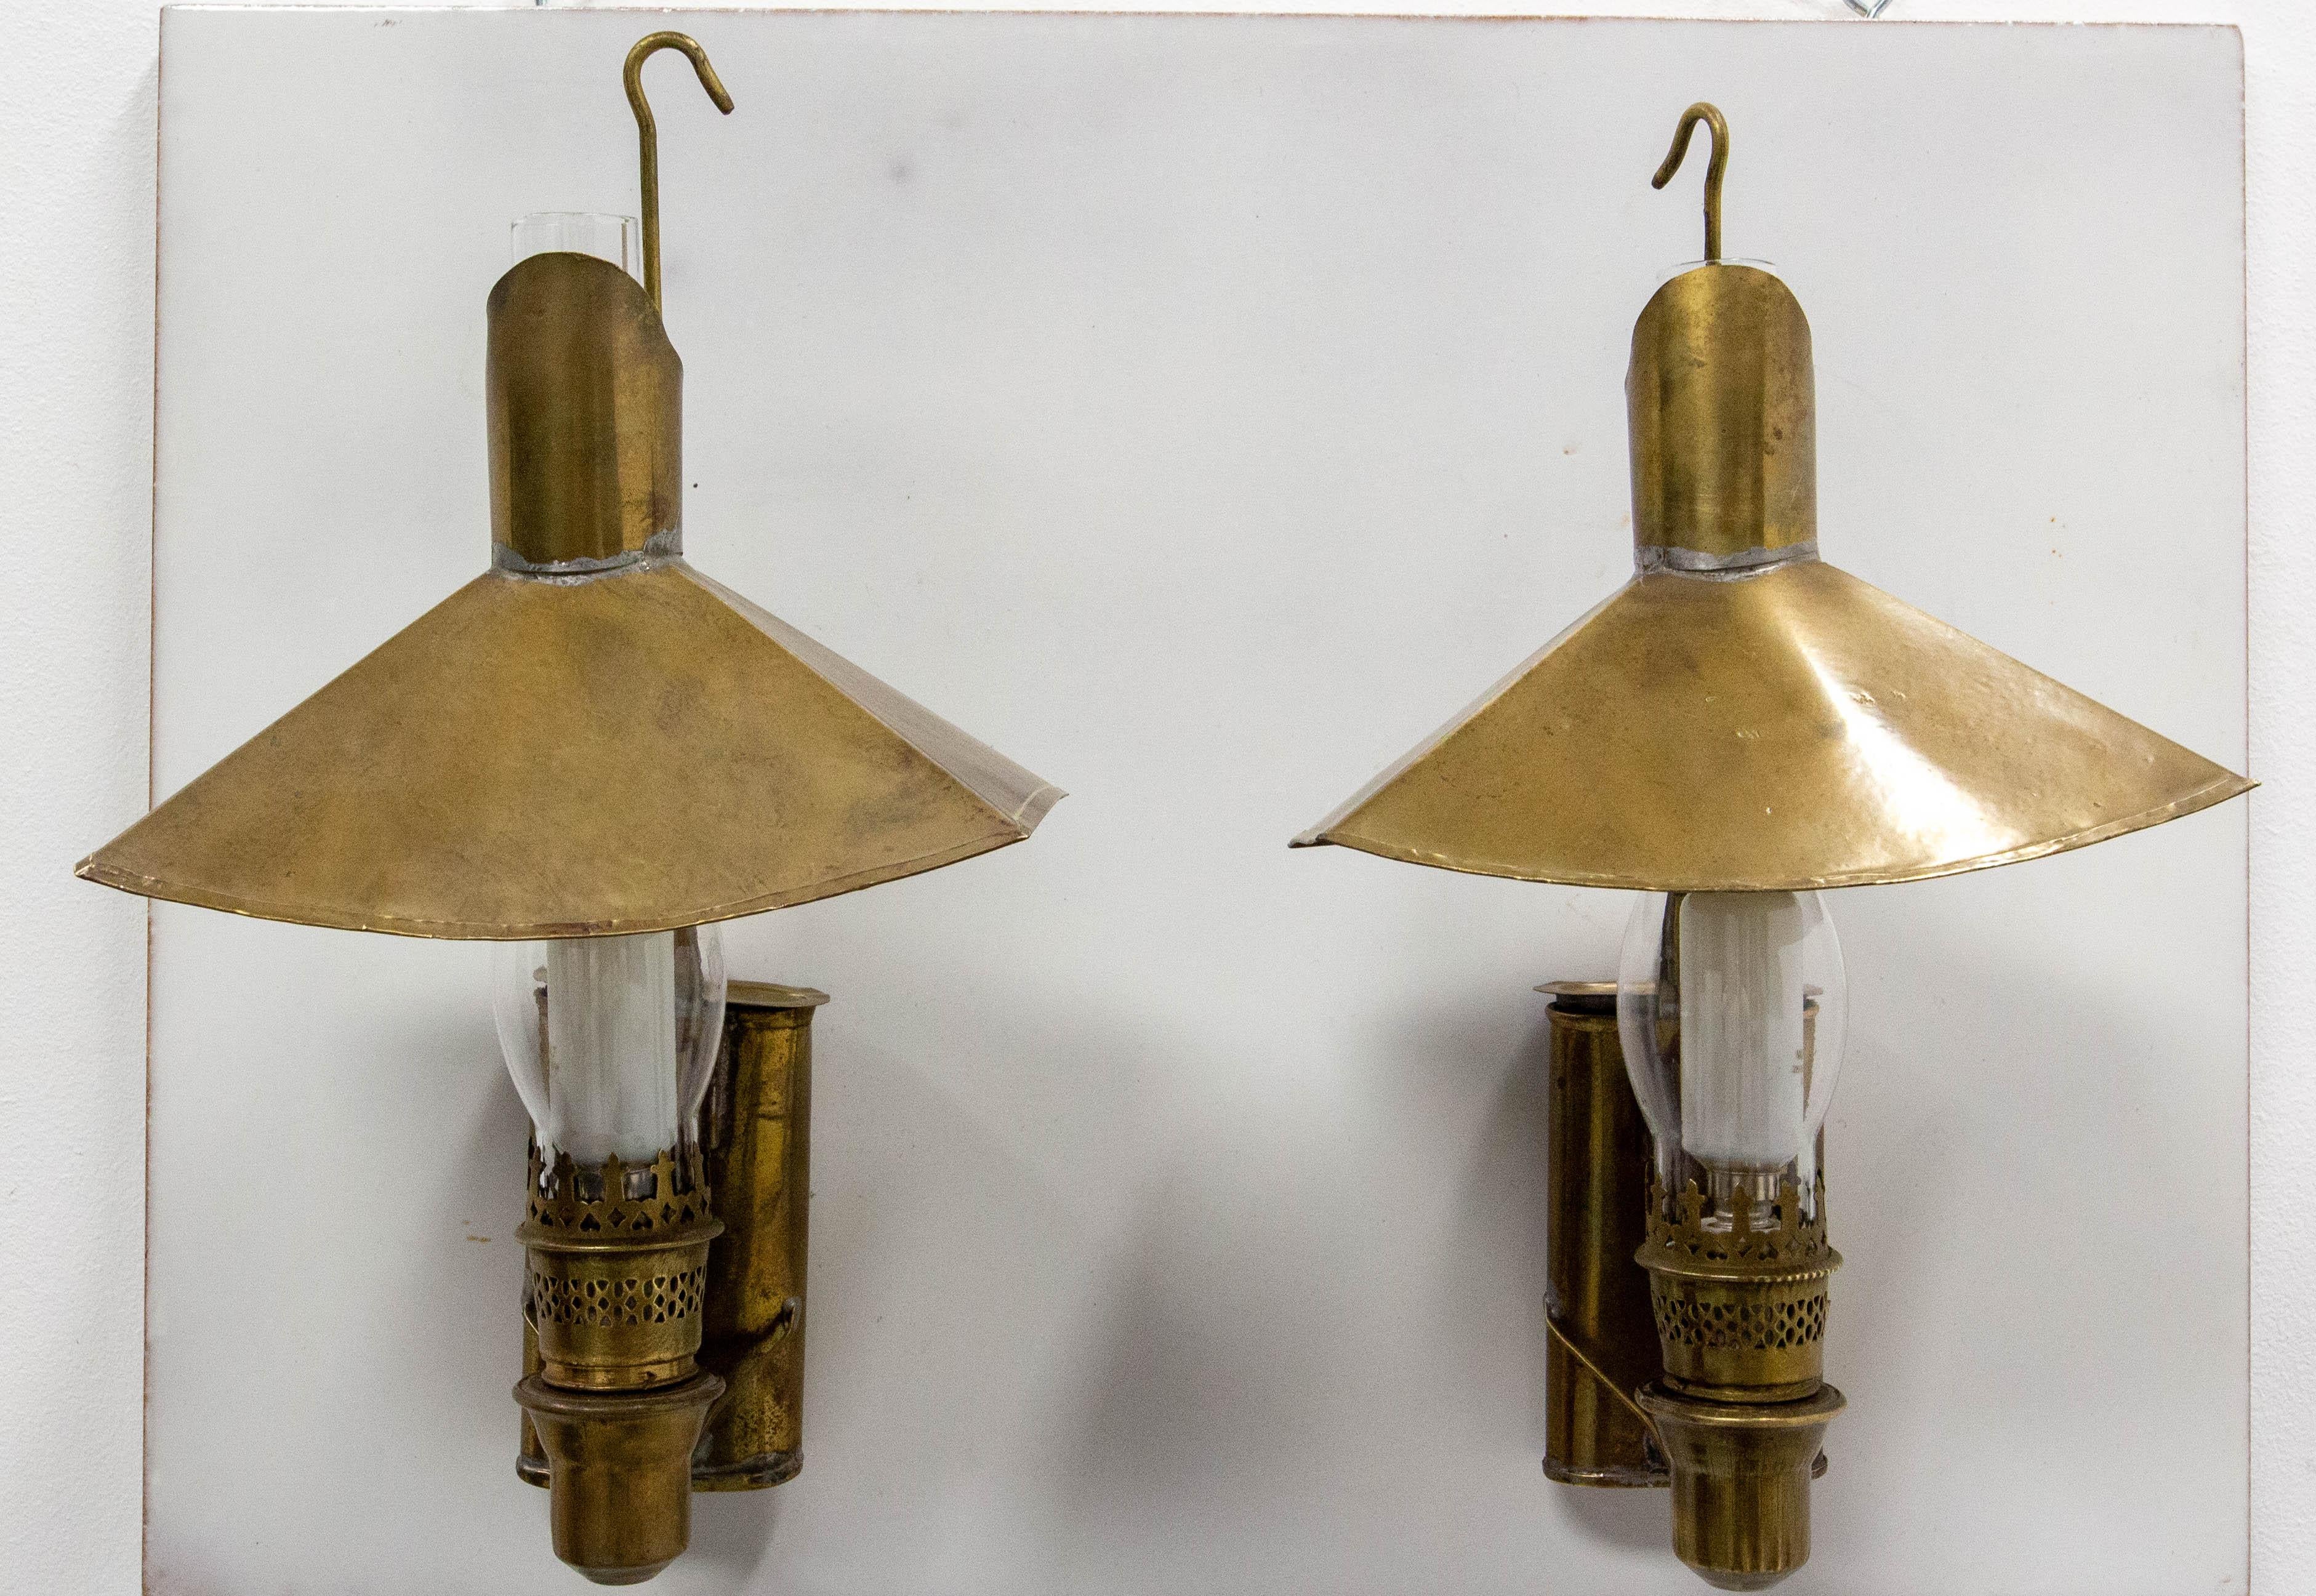 French light lanterns pair wall sconces iron and brass.
Behind each wall light their is a an oil tank.
It was transformed into electric lamps in the beginning of the 20th century.
Very characterful 
Good condition

Shipping: 
84 / 31 / 33 cm 1.3 kg.